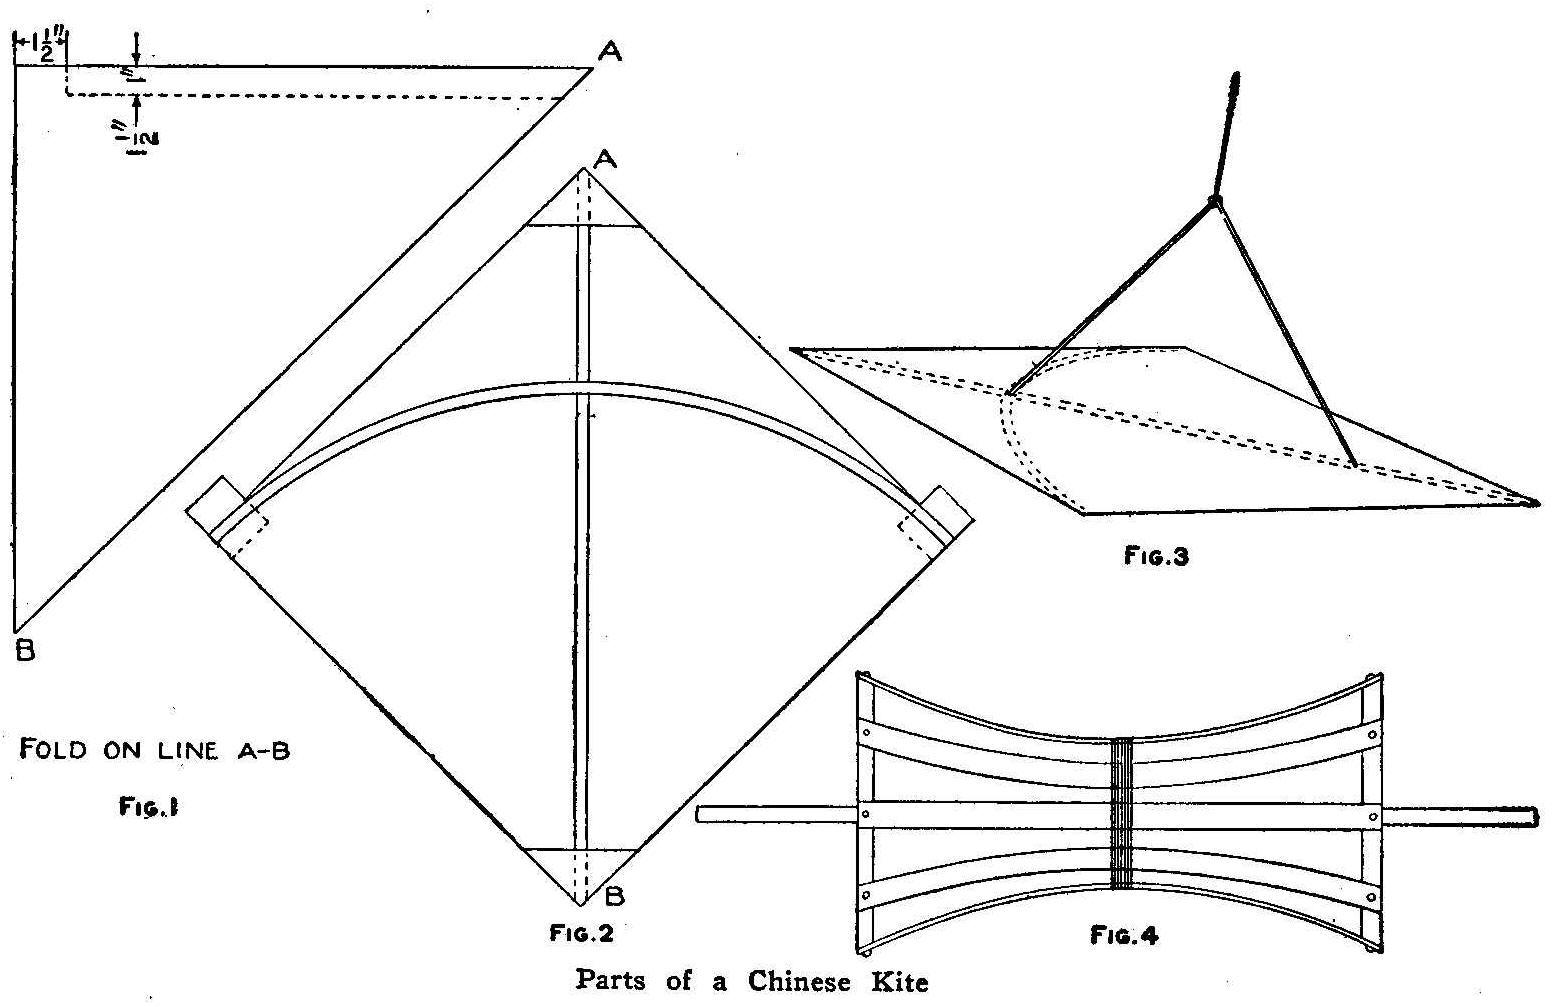 Parts of a Chinese Kite